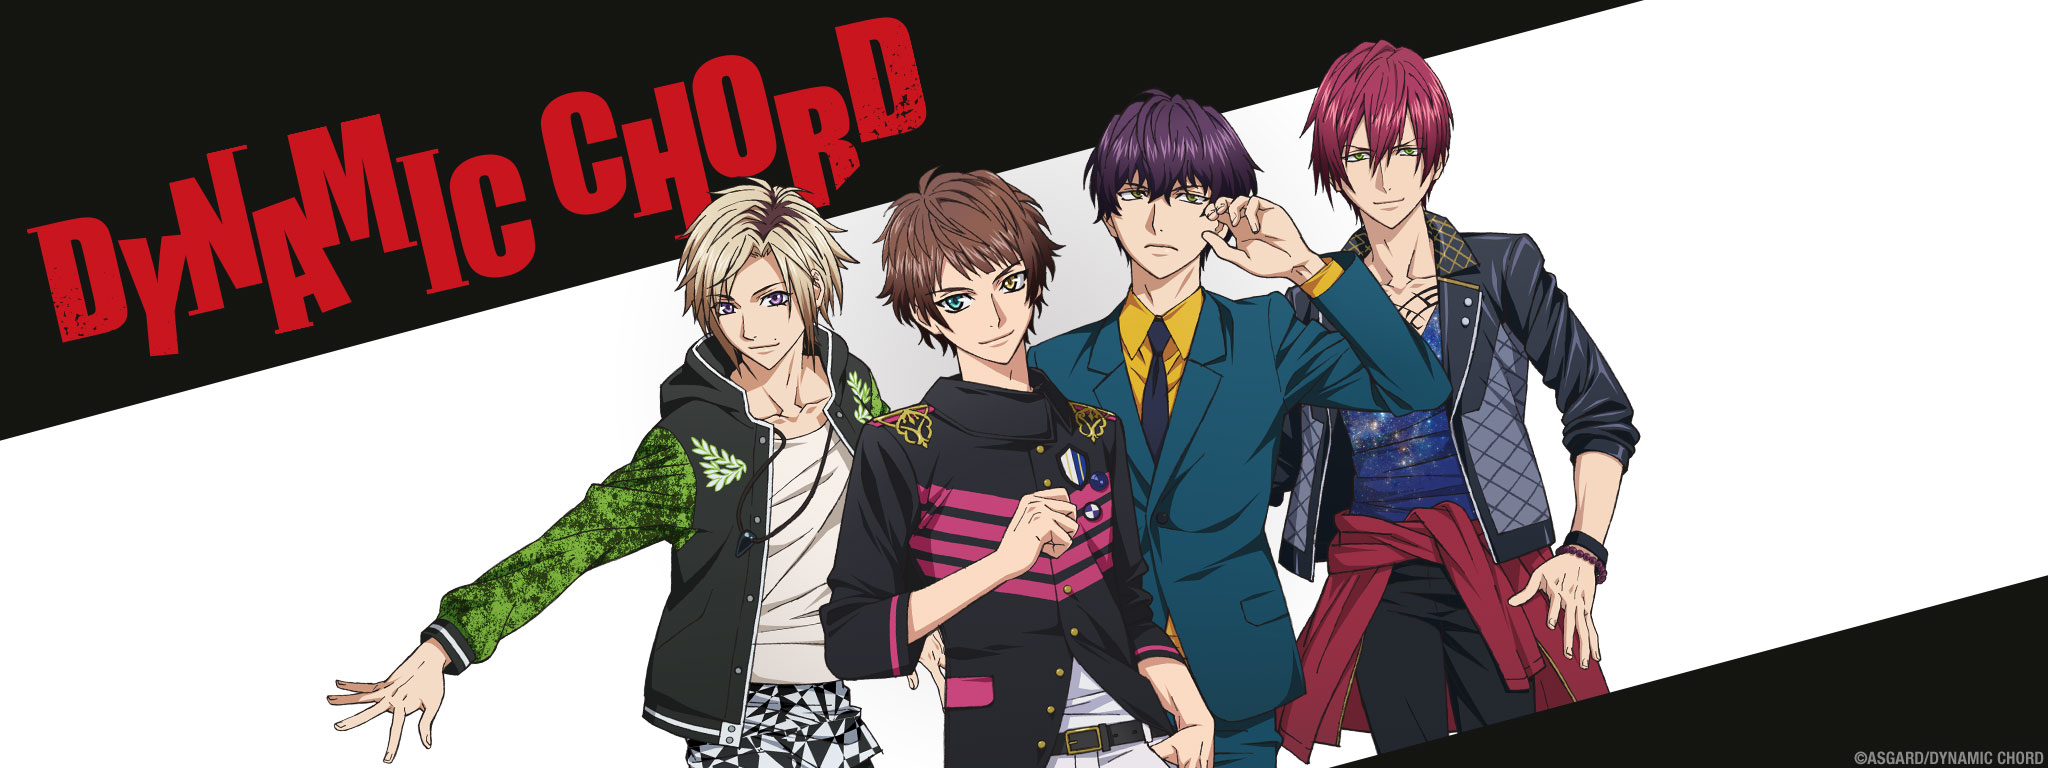 Title Art for DYNAMIC CHORD